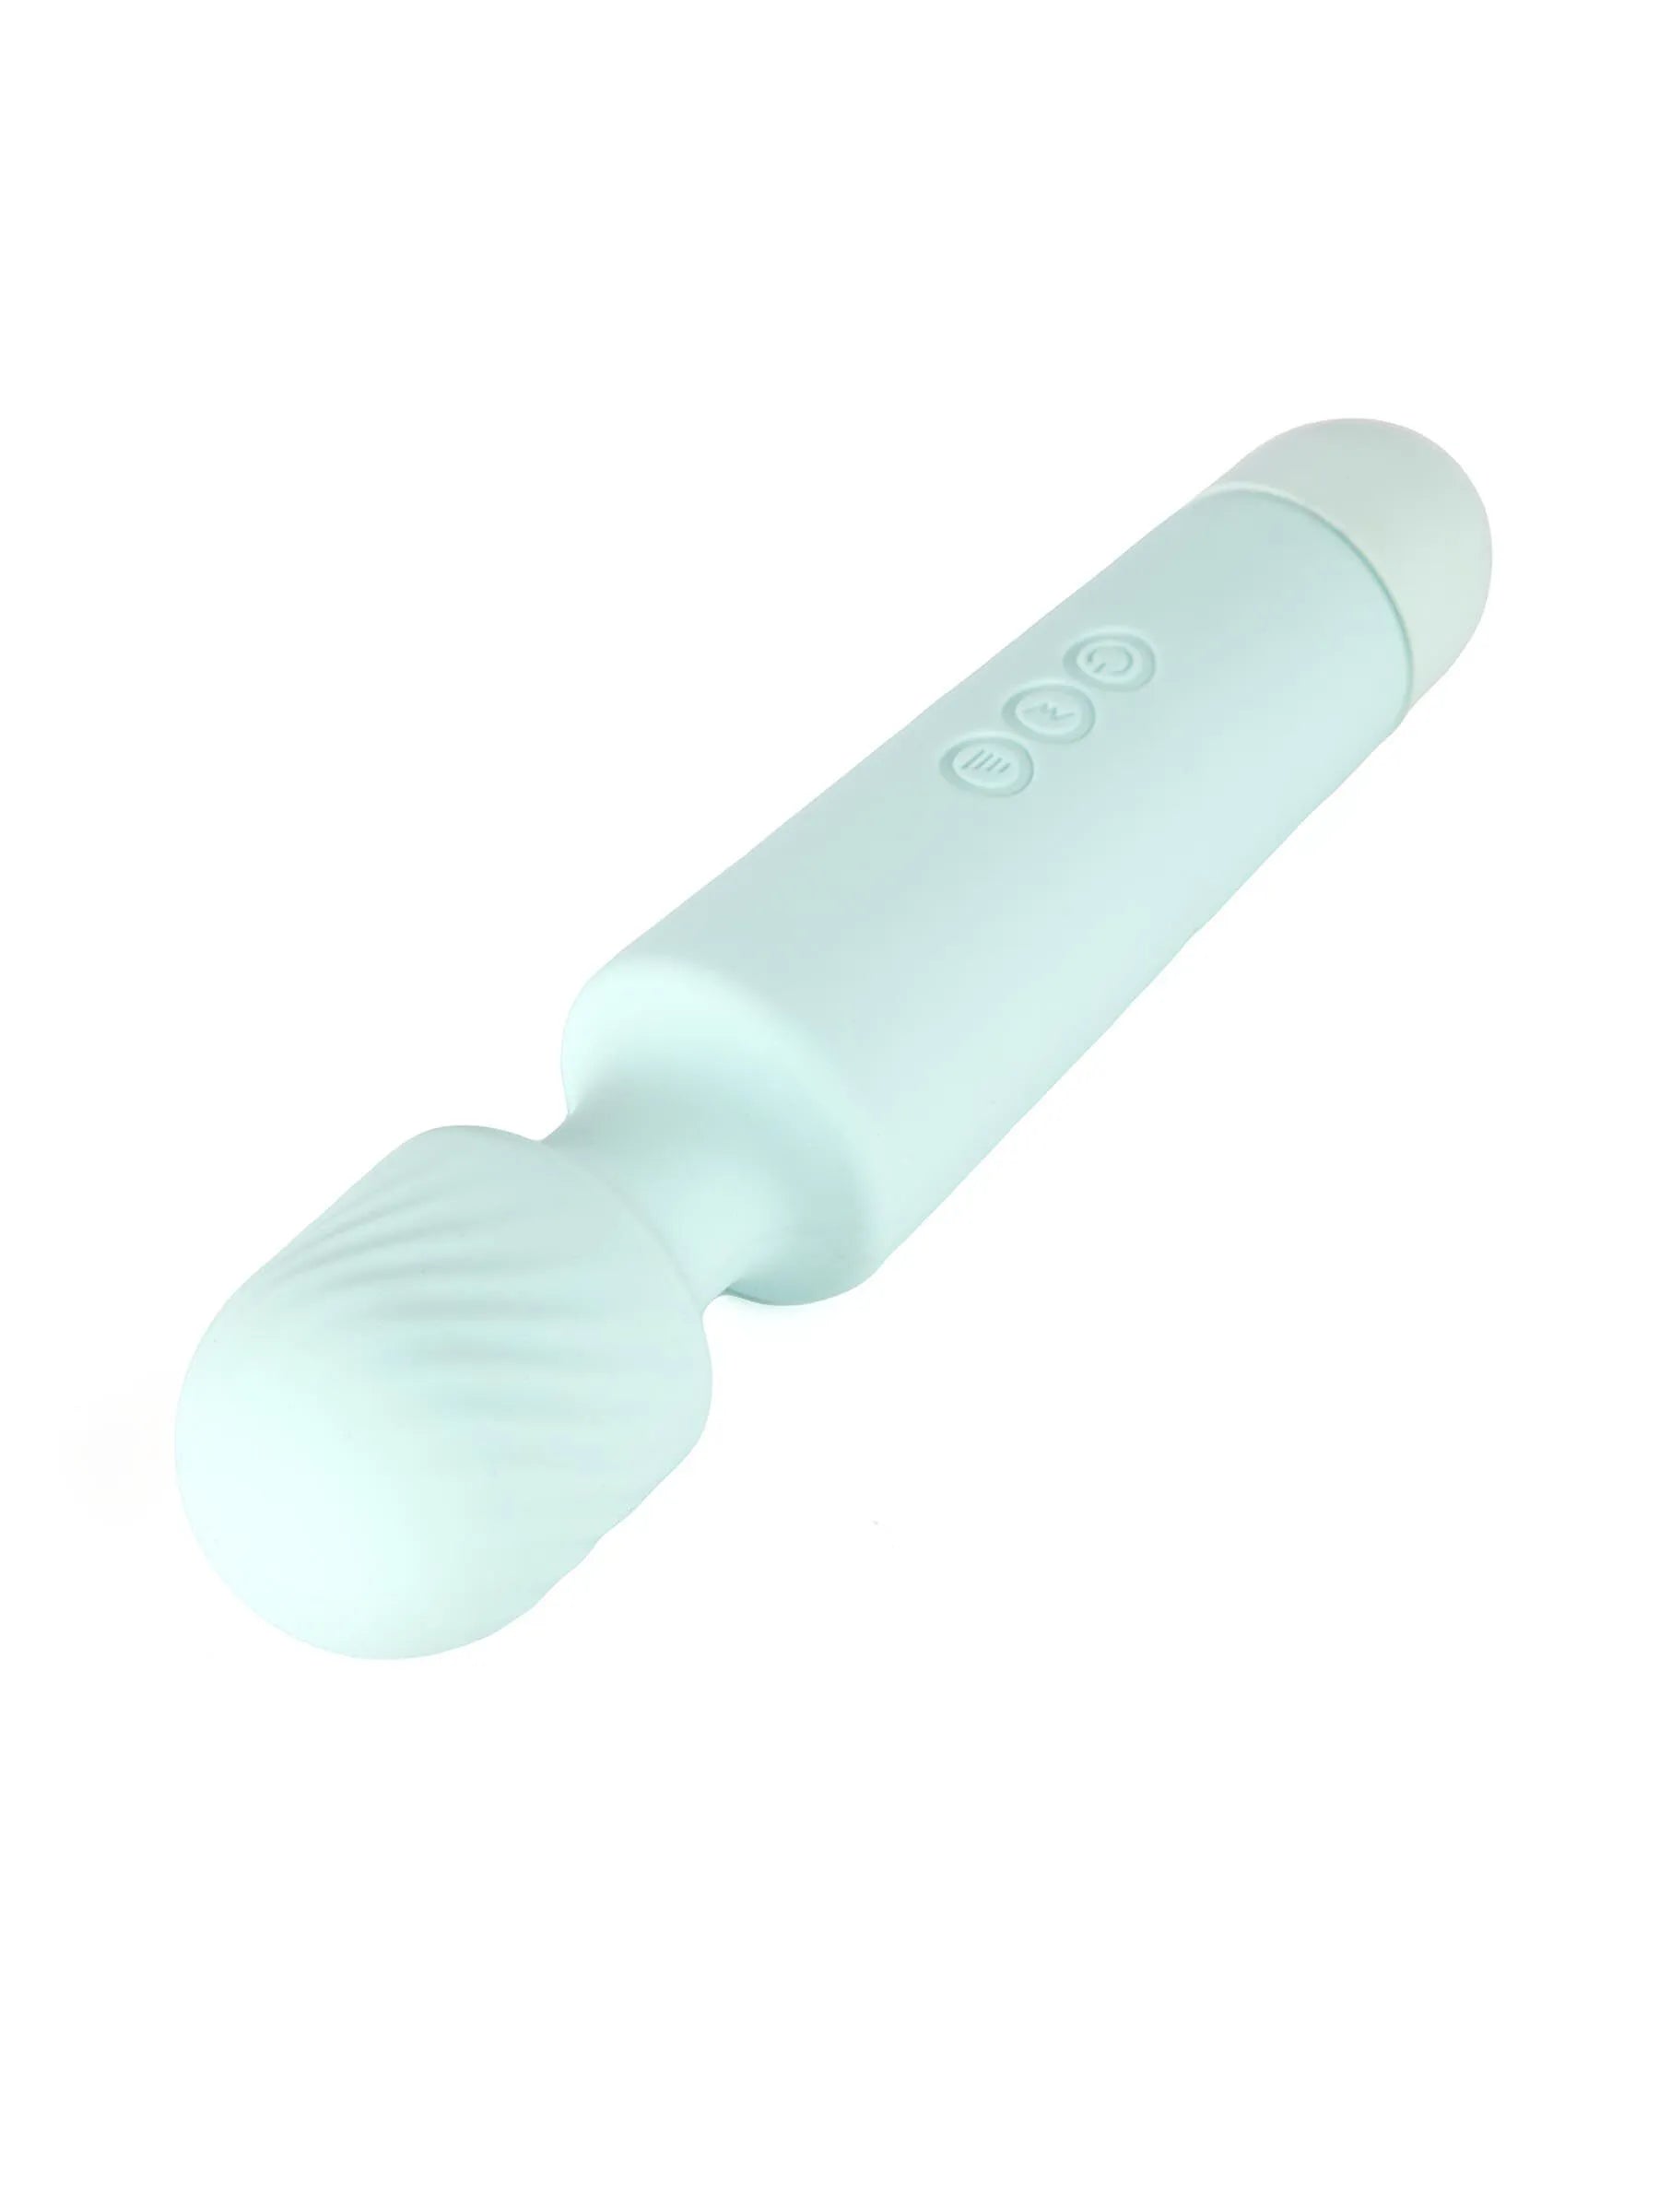 My Viv Massage Wand From Ann Summers, Image 02